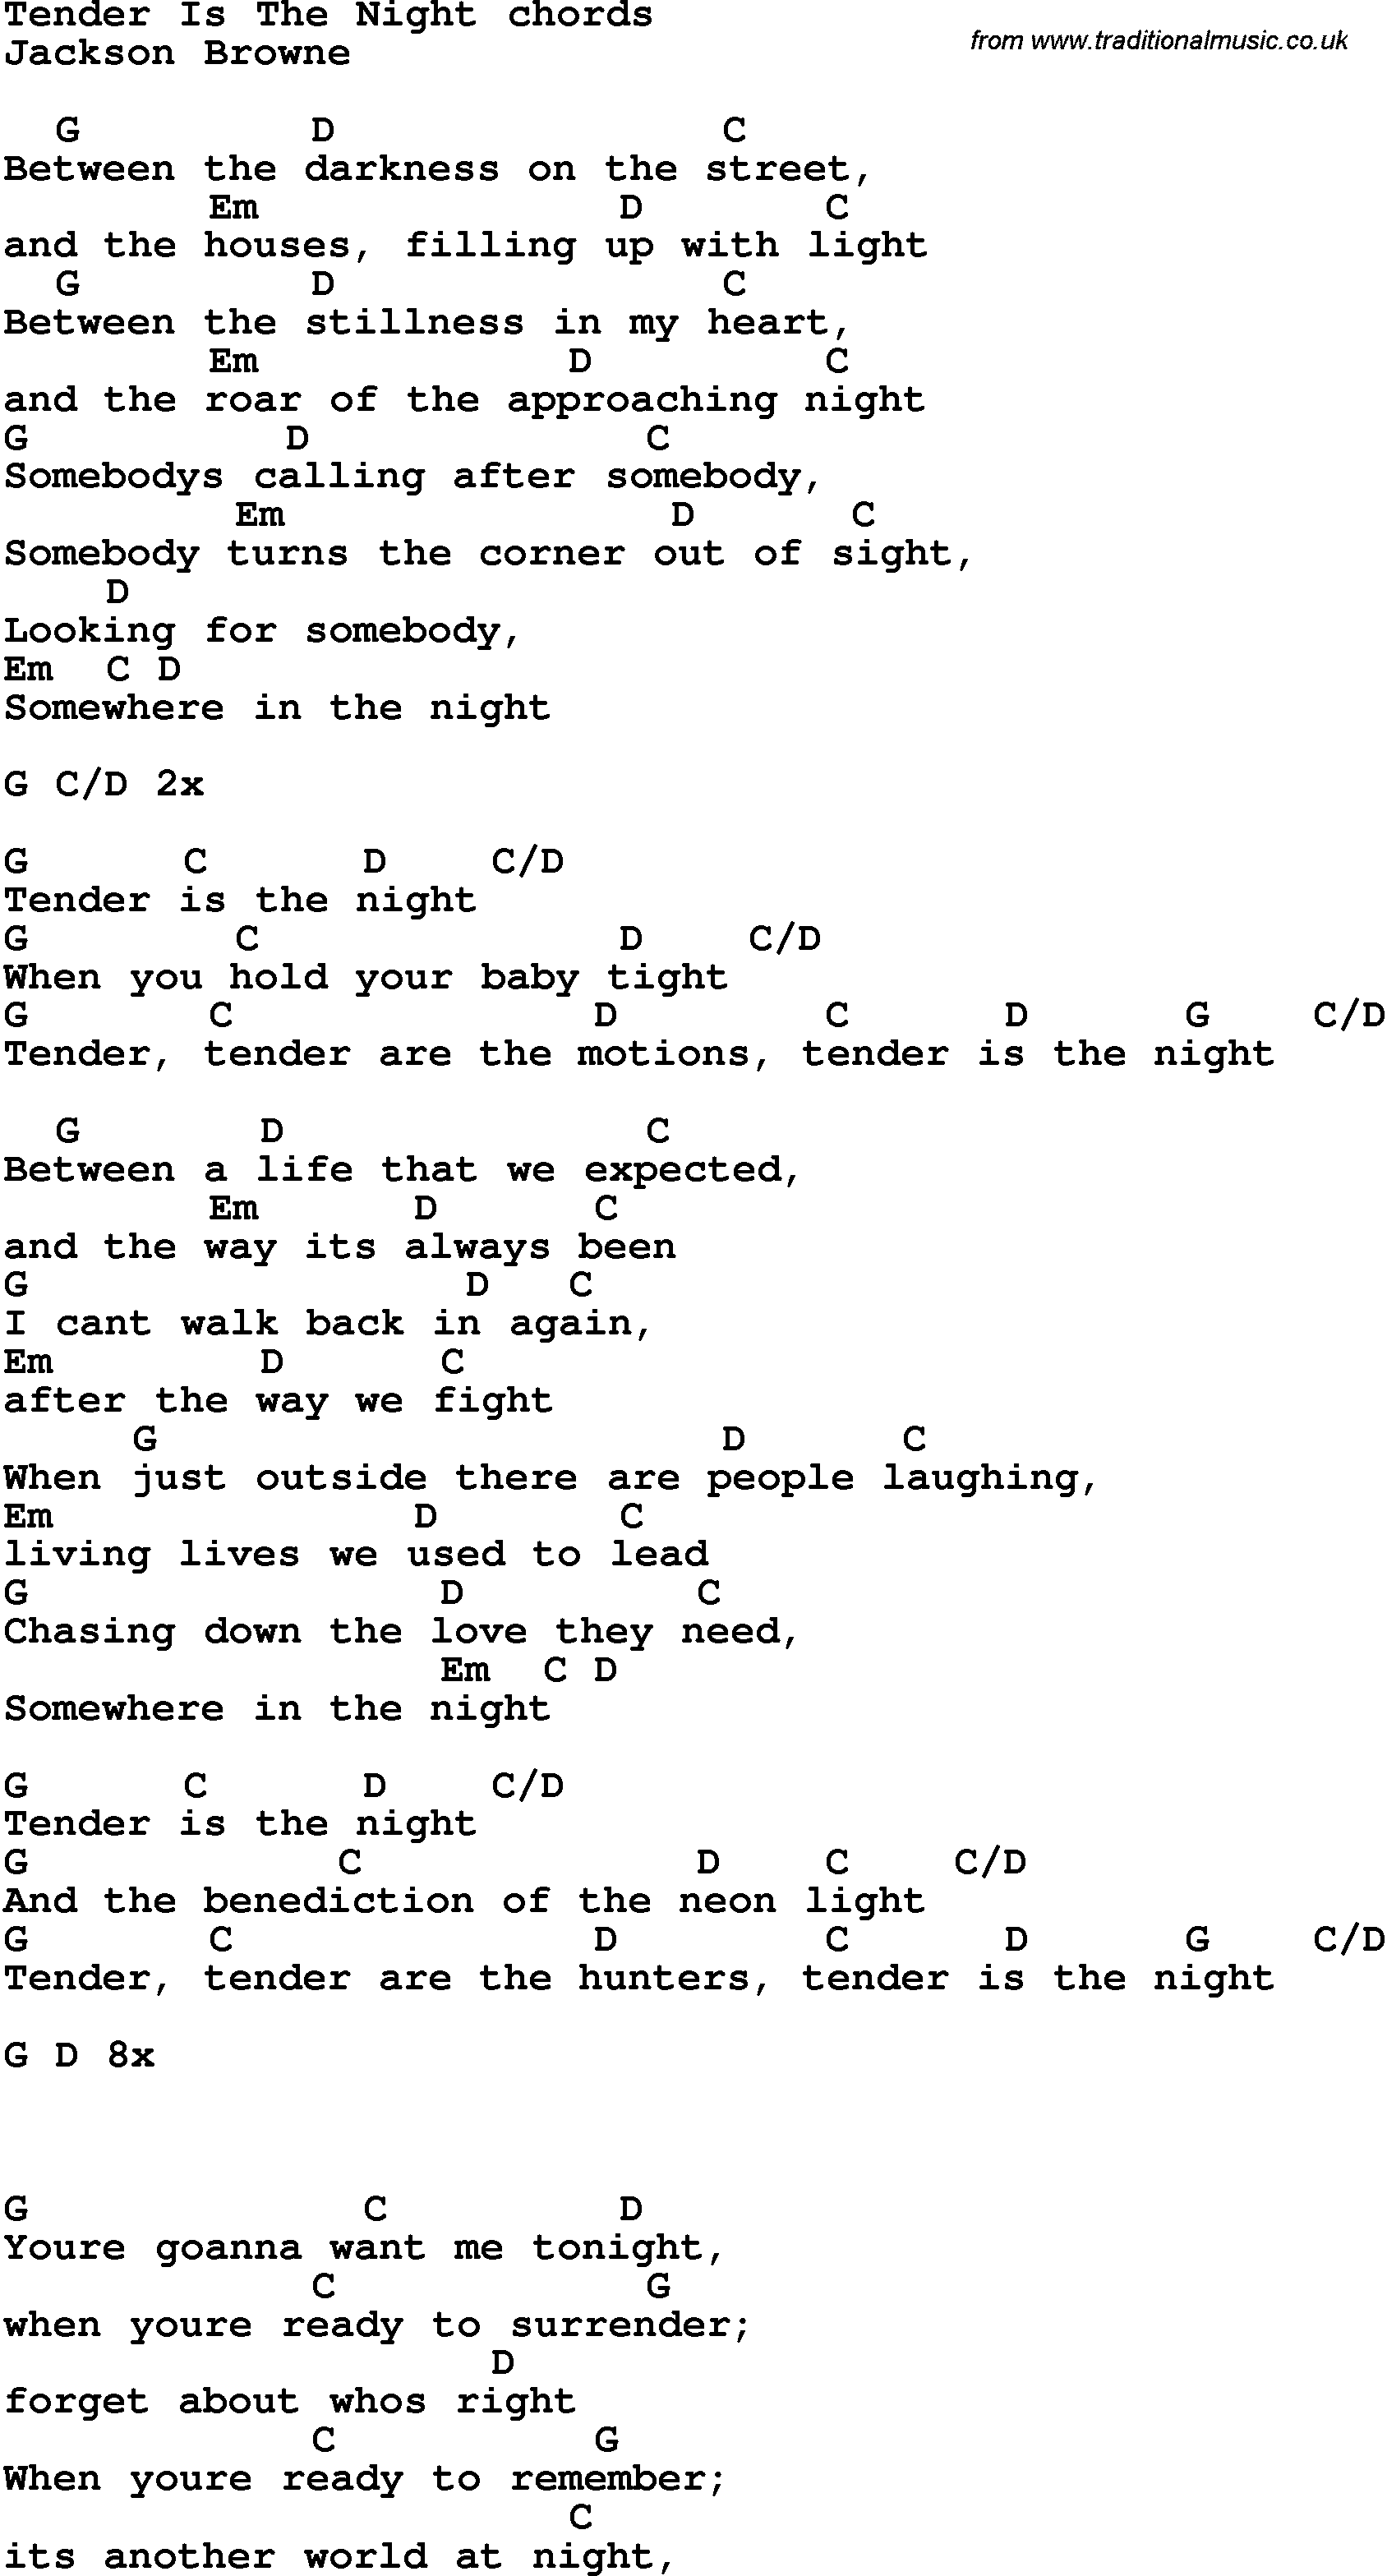 Song Lyrics with guitar chords for Tender Is The Night - Jackson Browne